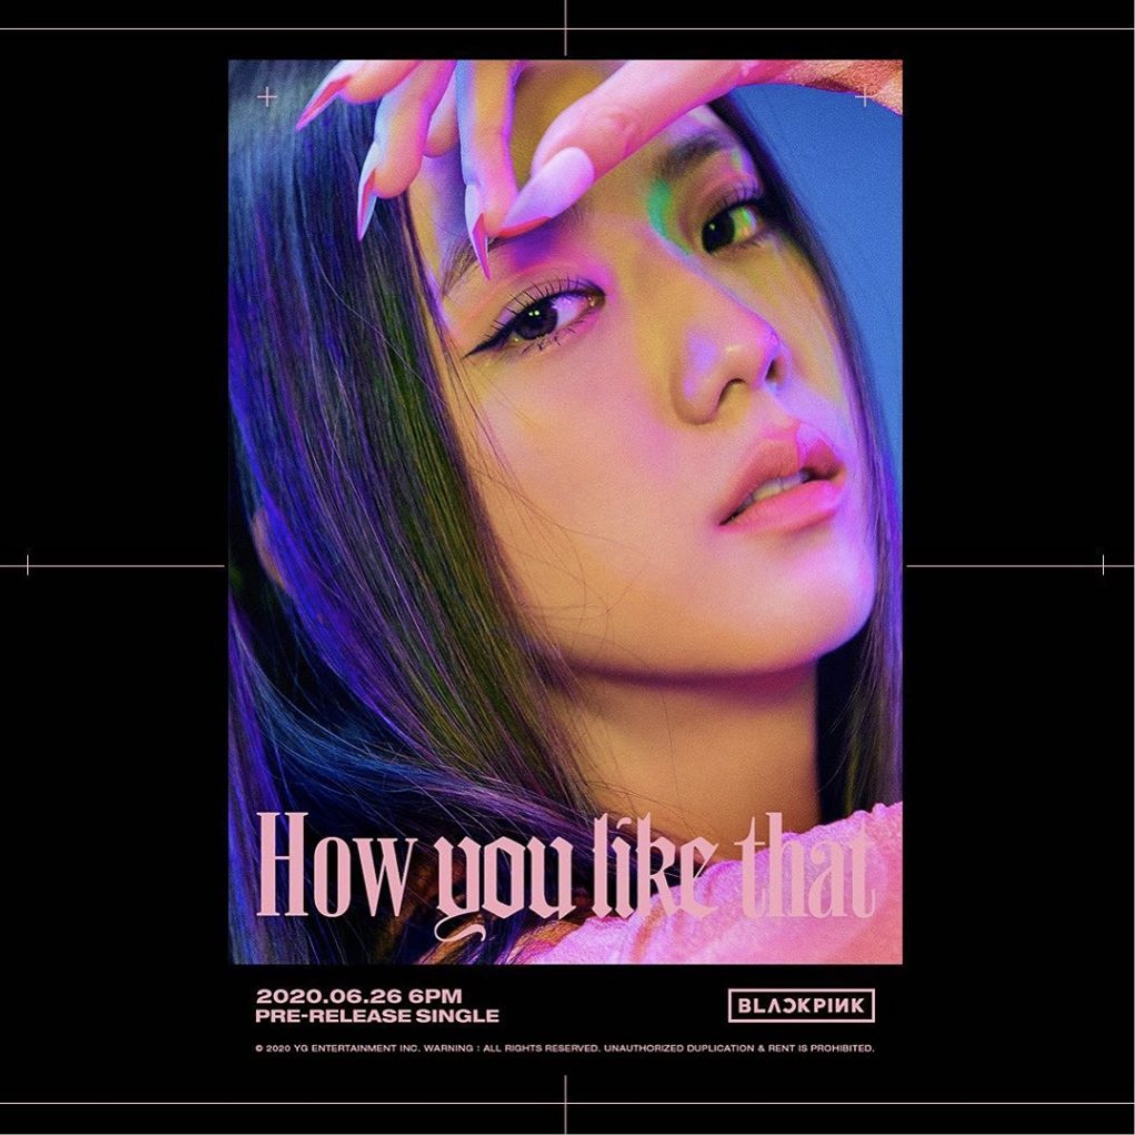 How You Like That: BLACKPINK's new single is out now — Hashtag Legend